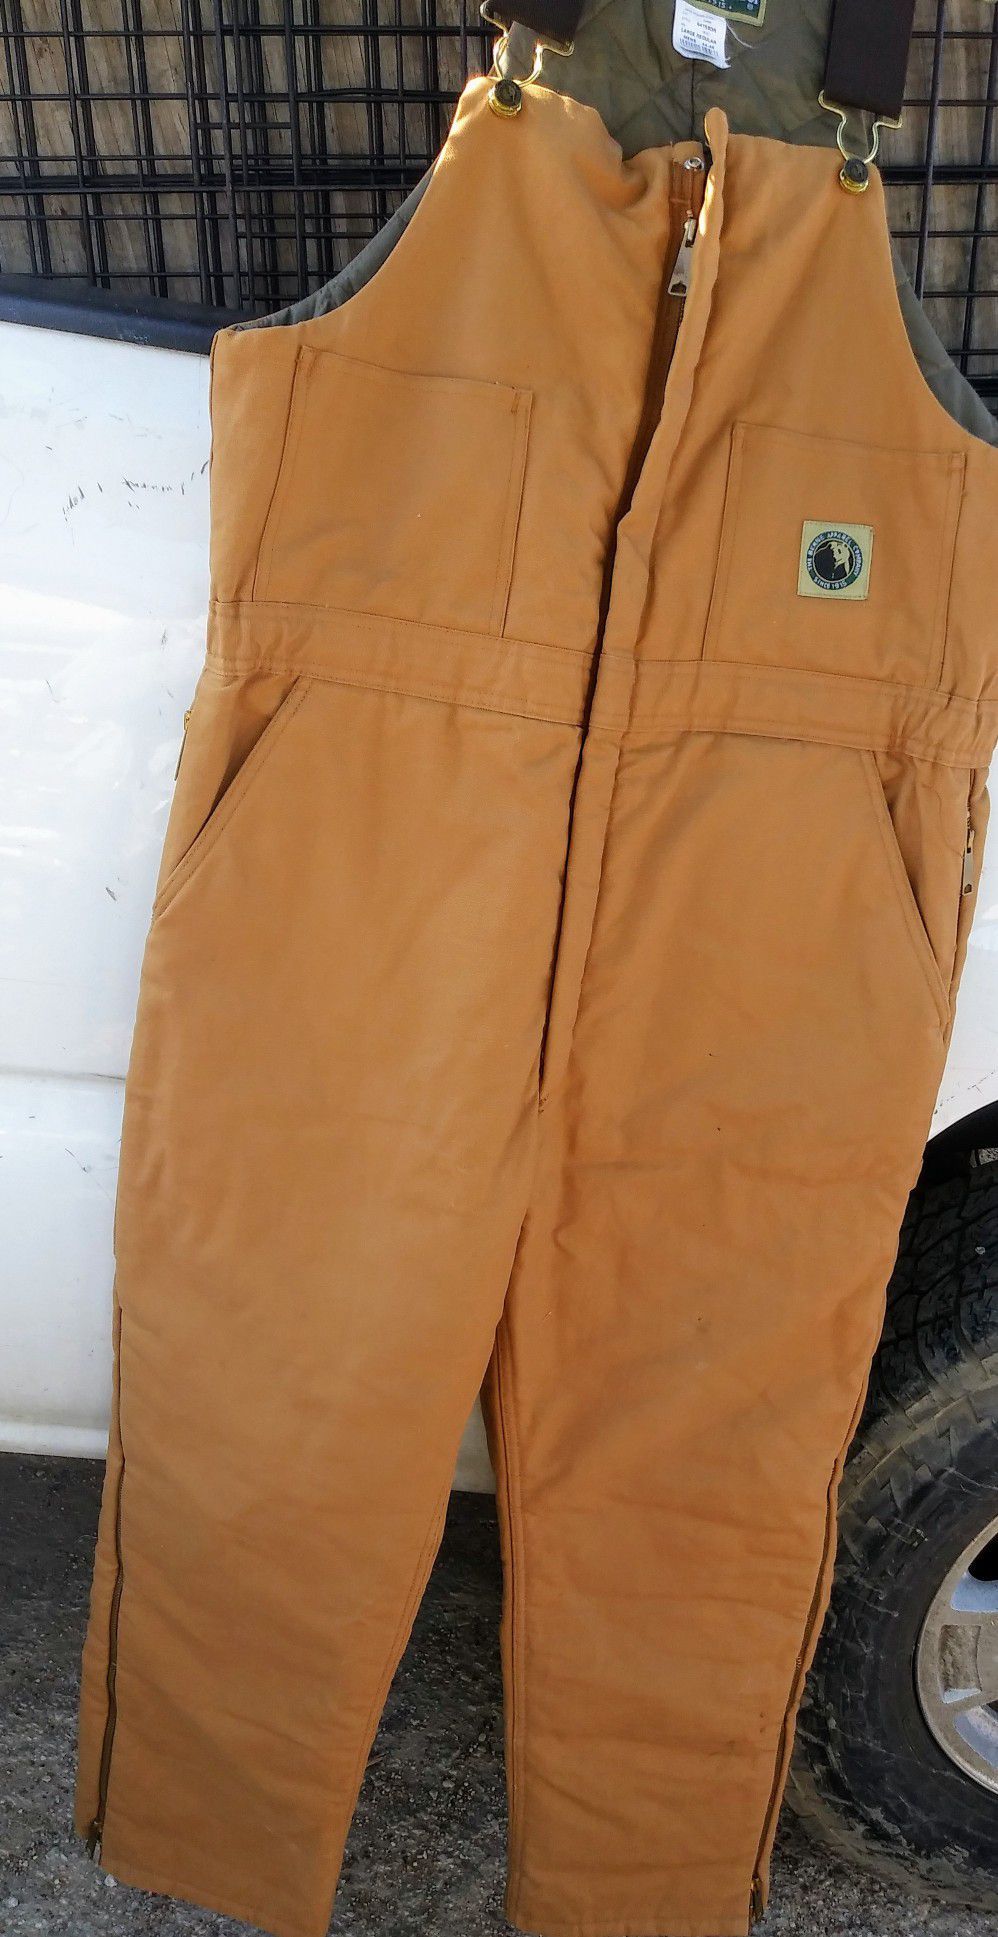 Men's coverall in really good conditions , almost new. Sz. L 42-44....$60